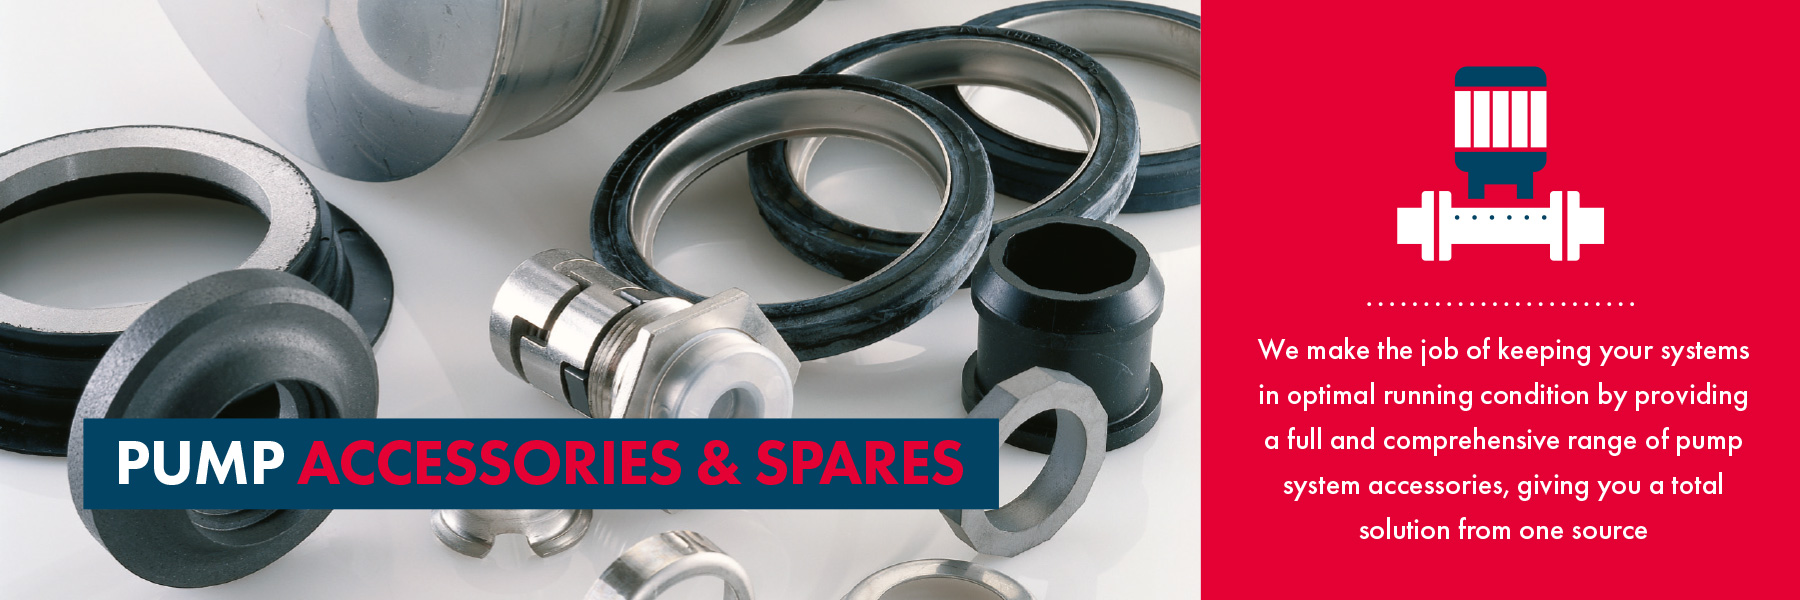 pump spares and accessories banner